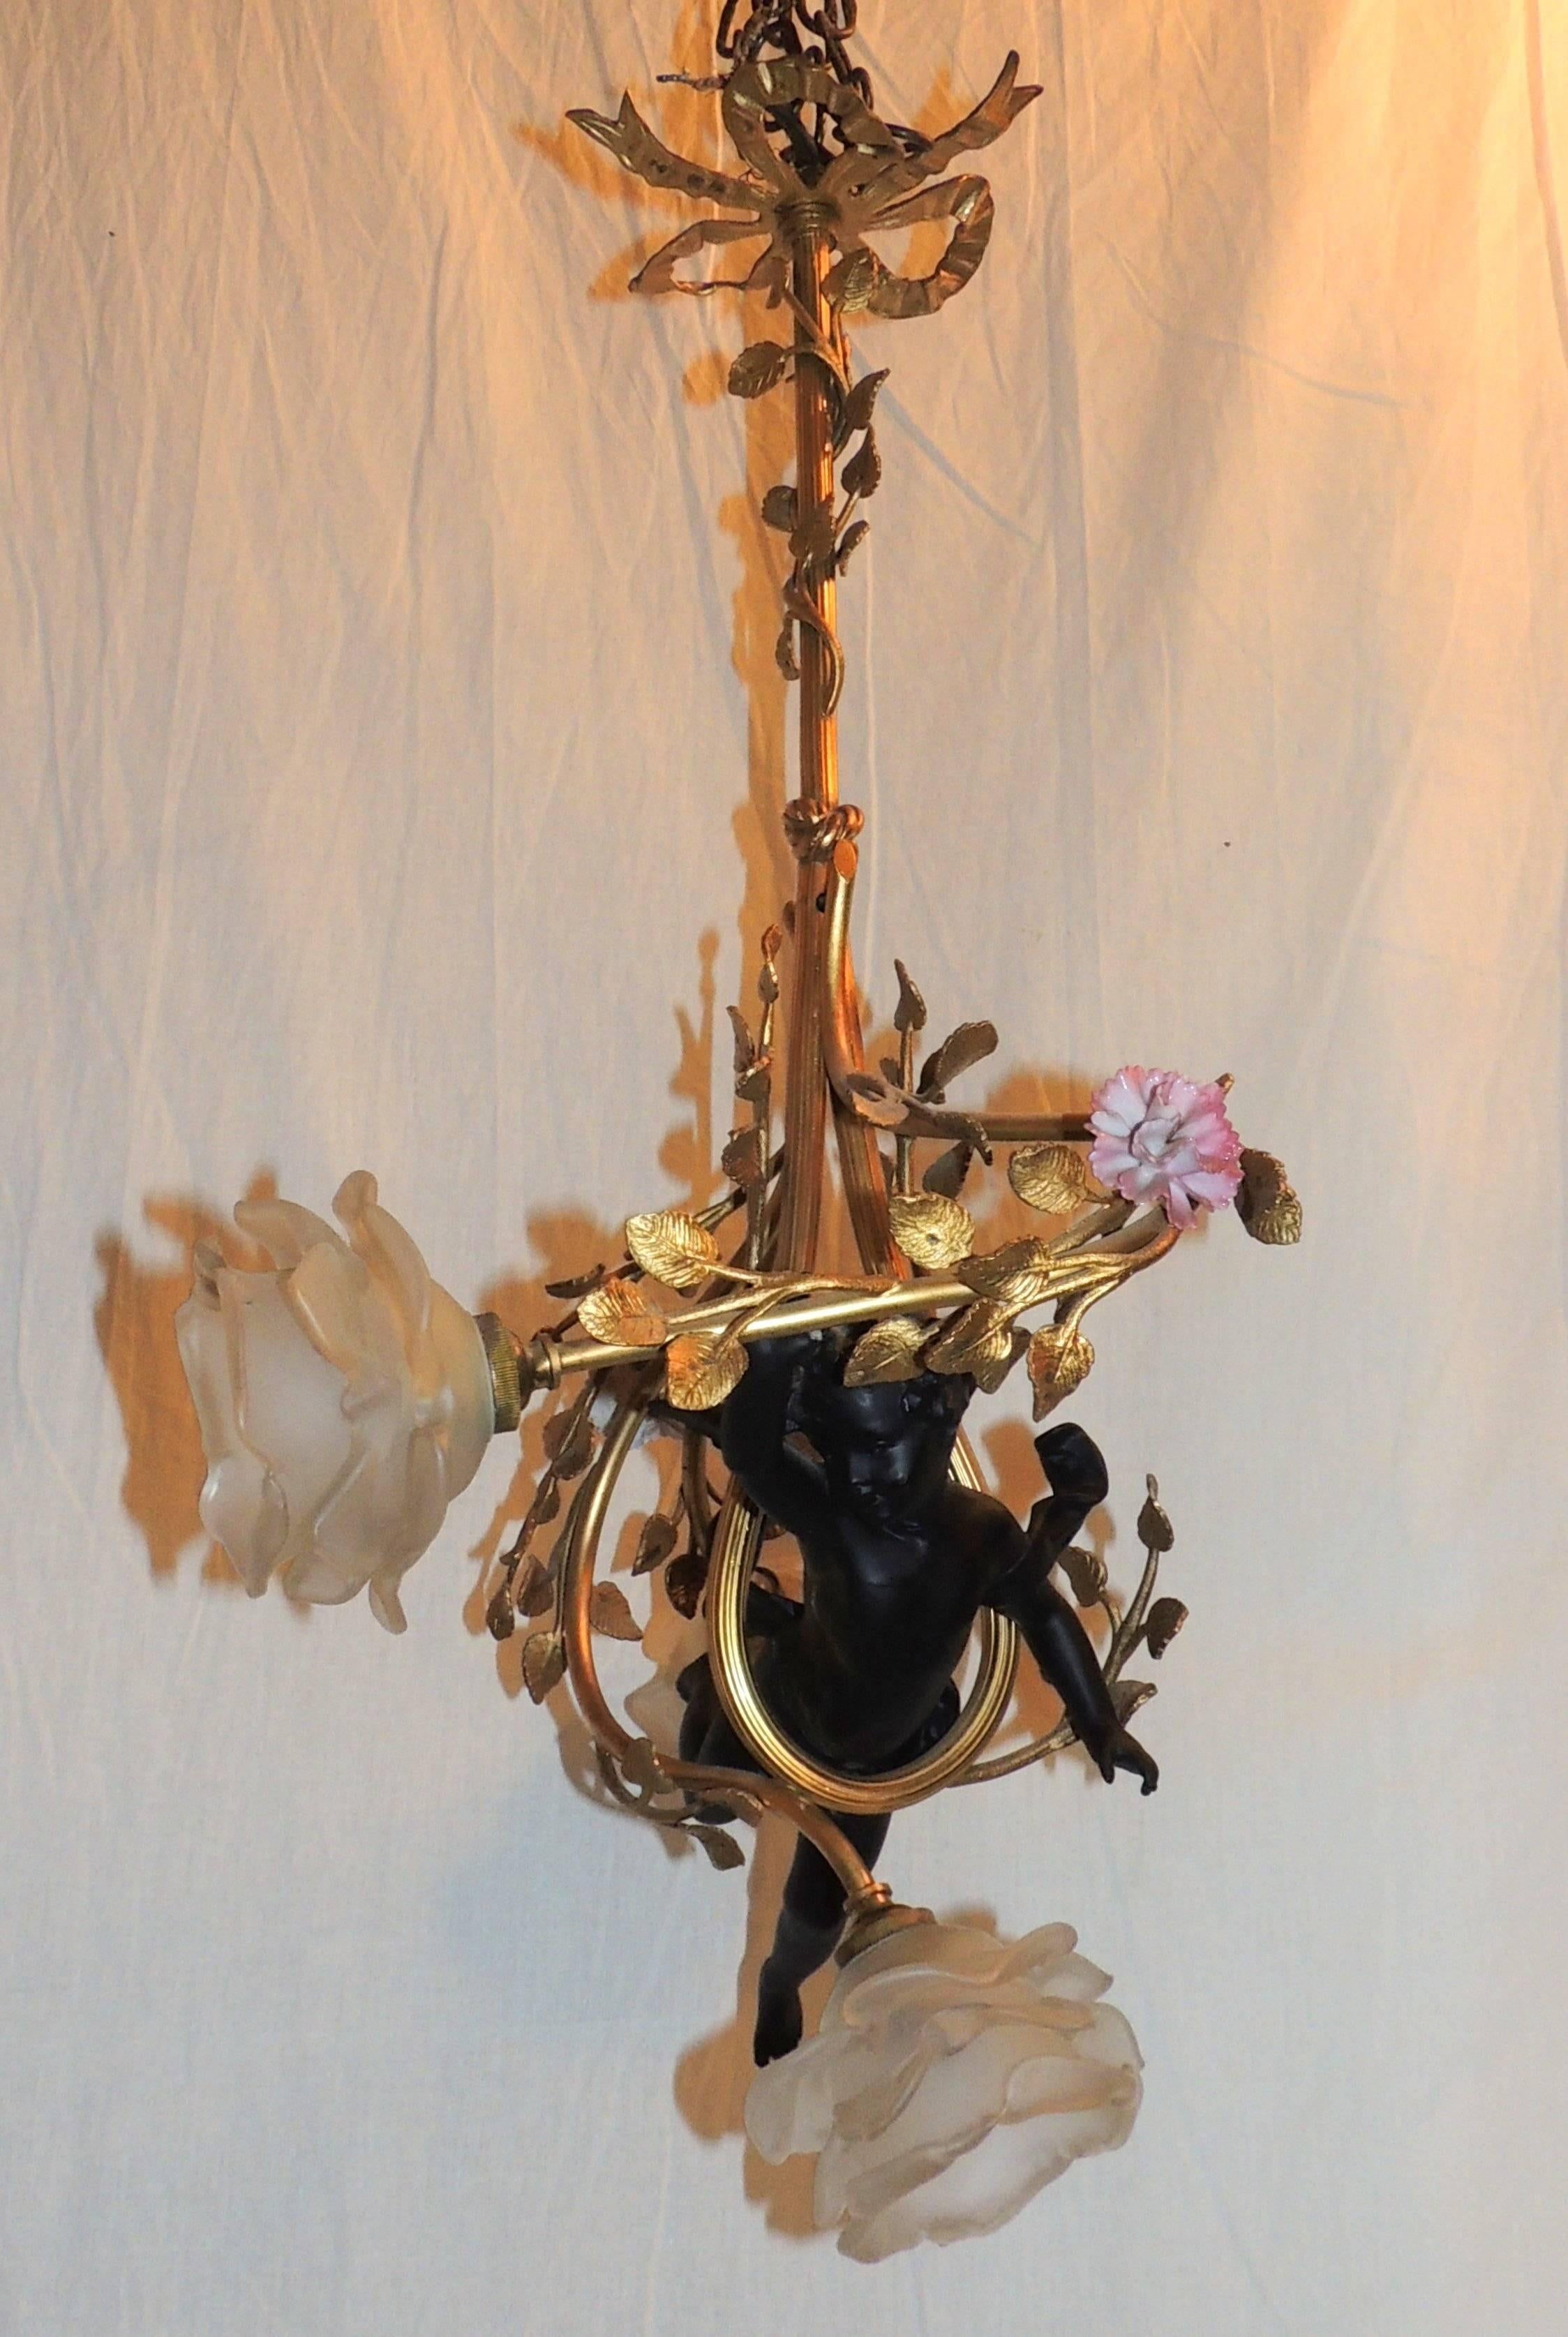 This lovely French doré́ bronze chandelier has branches entwined around the sweet cherub above a branch with three lights. Original frosted flower shades and porcelain flowers accent the leaf decorated branches.

Measures: 24